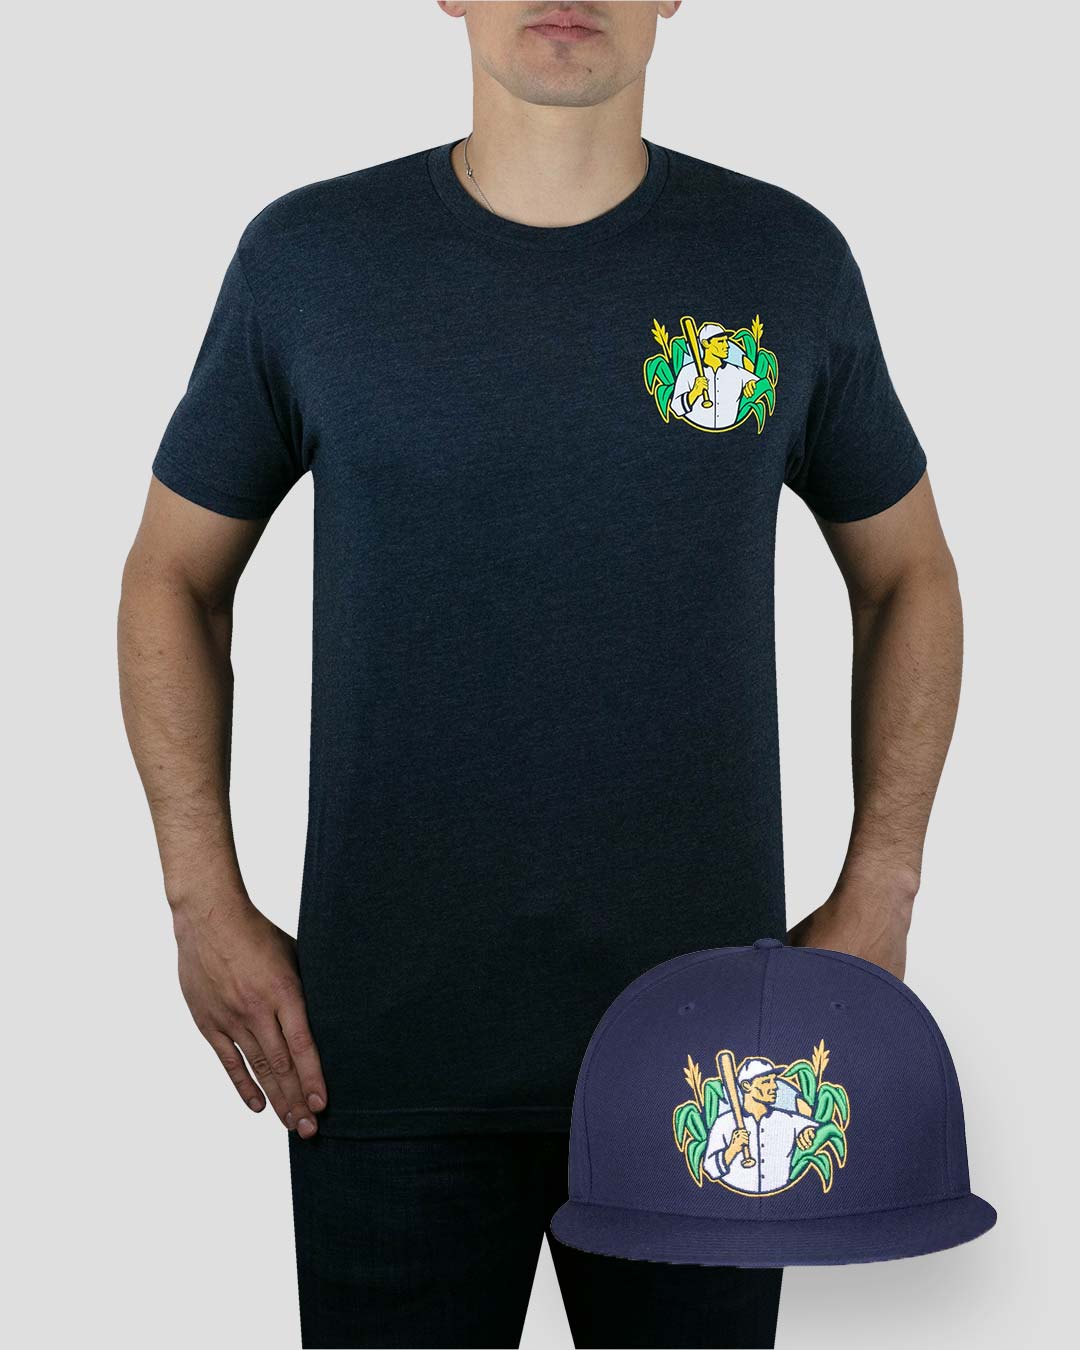 Battery Bundle - Field of Dreams People Will Come Pack: Snapback and Tee